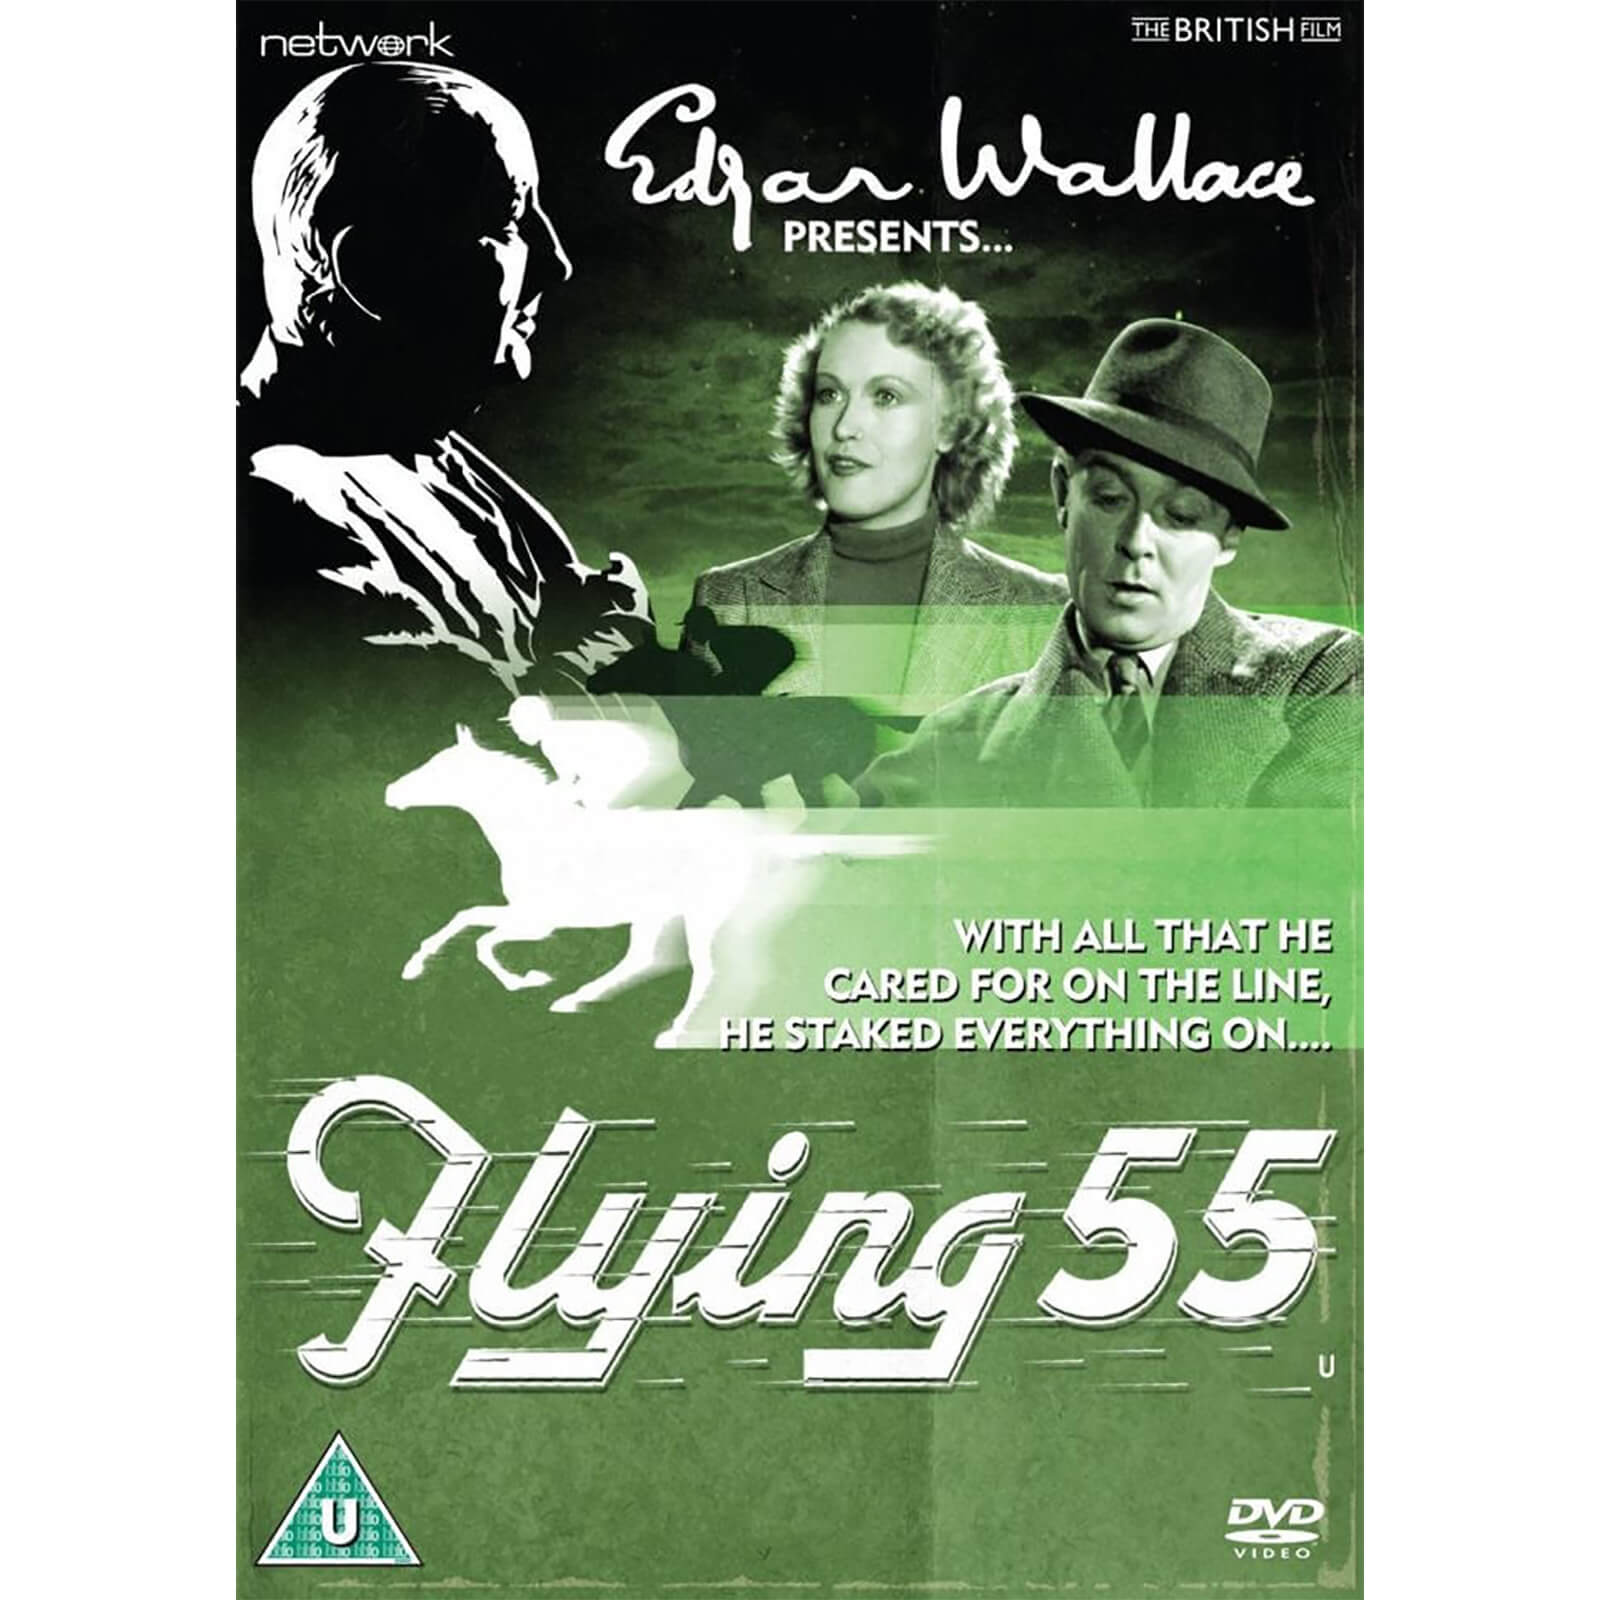 Edgar Wallace's Flying Fifty-Five von Network